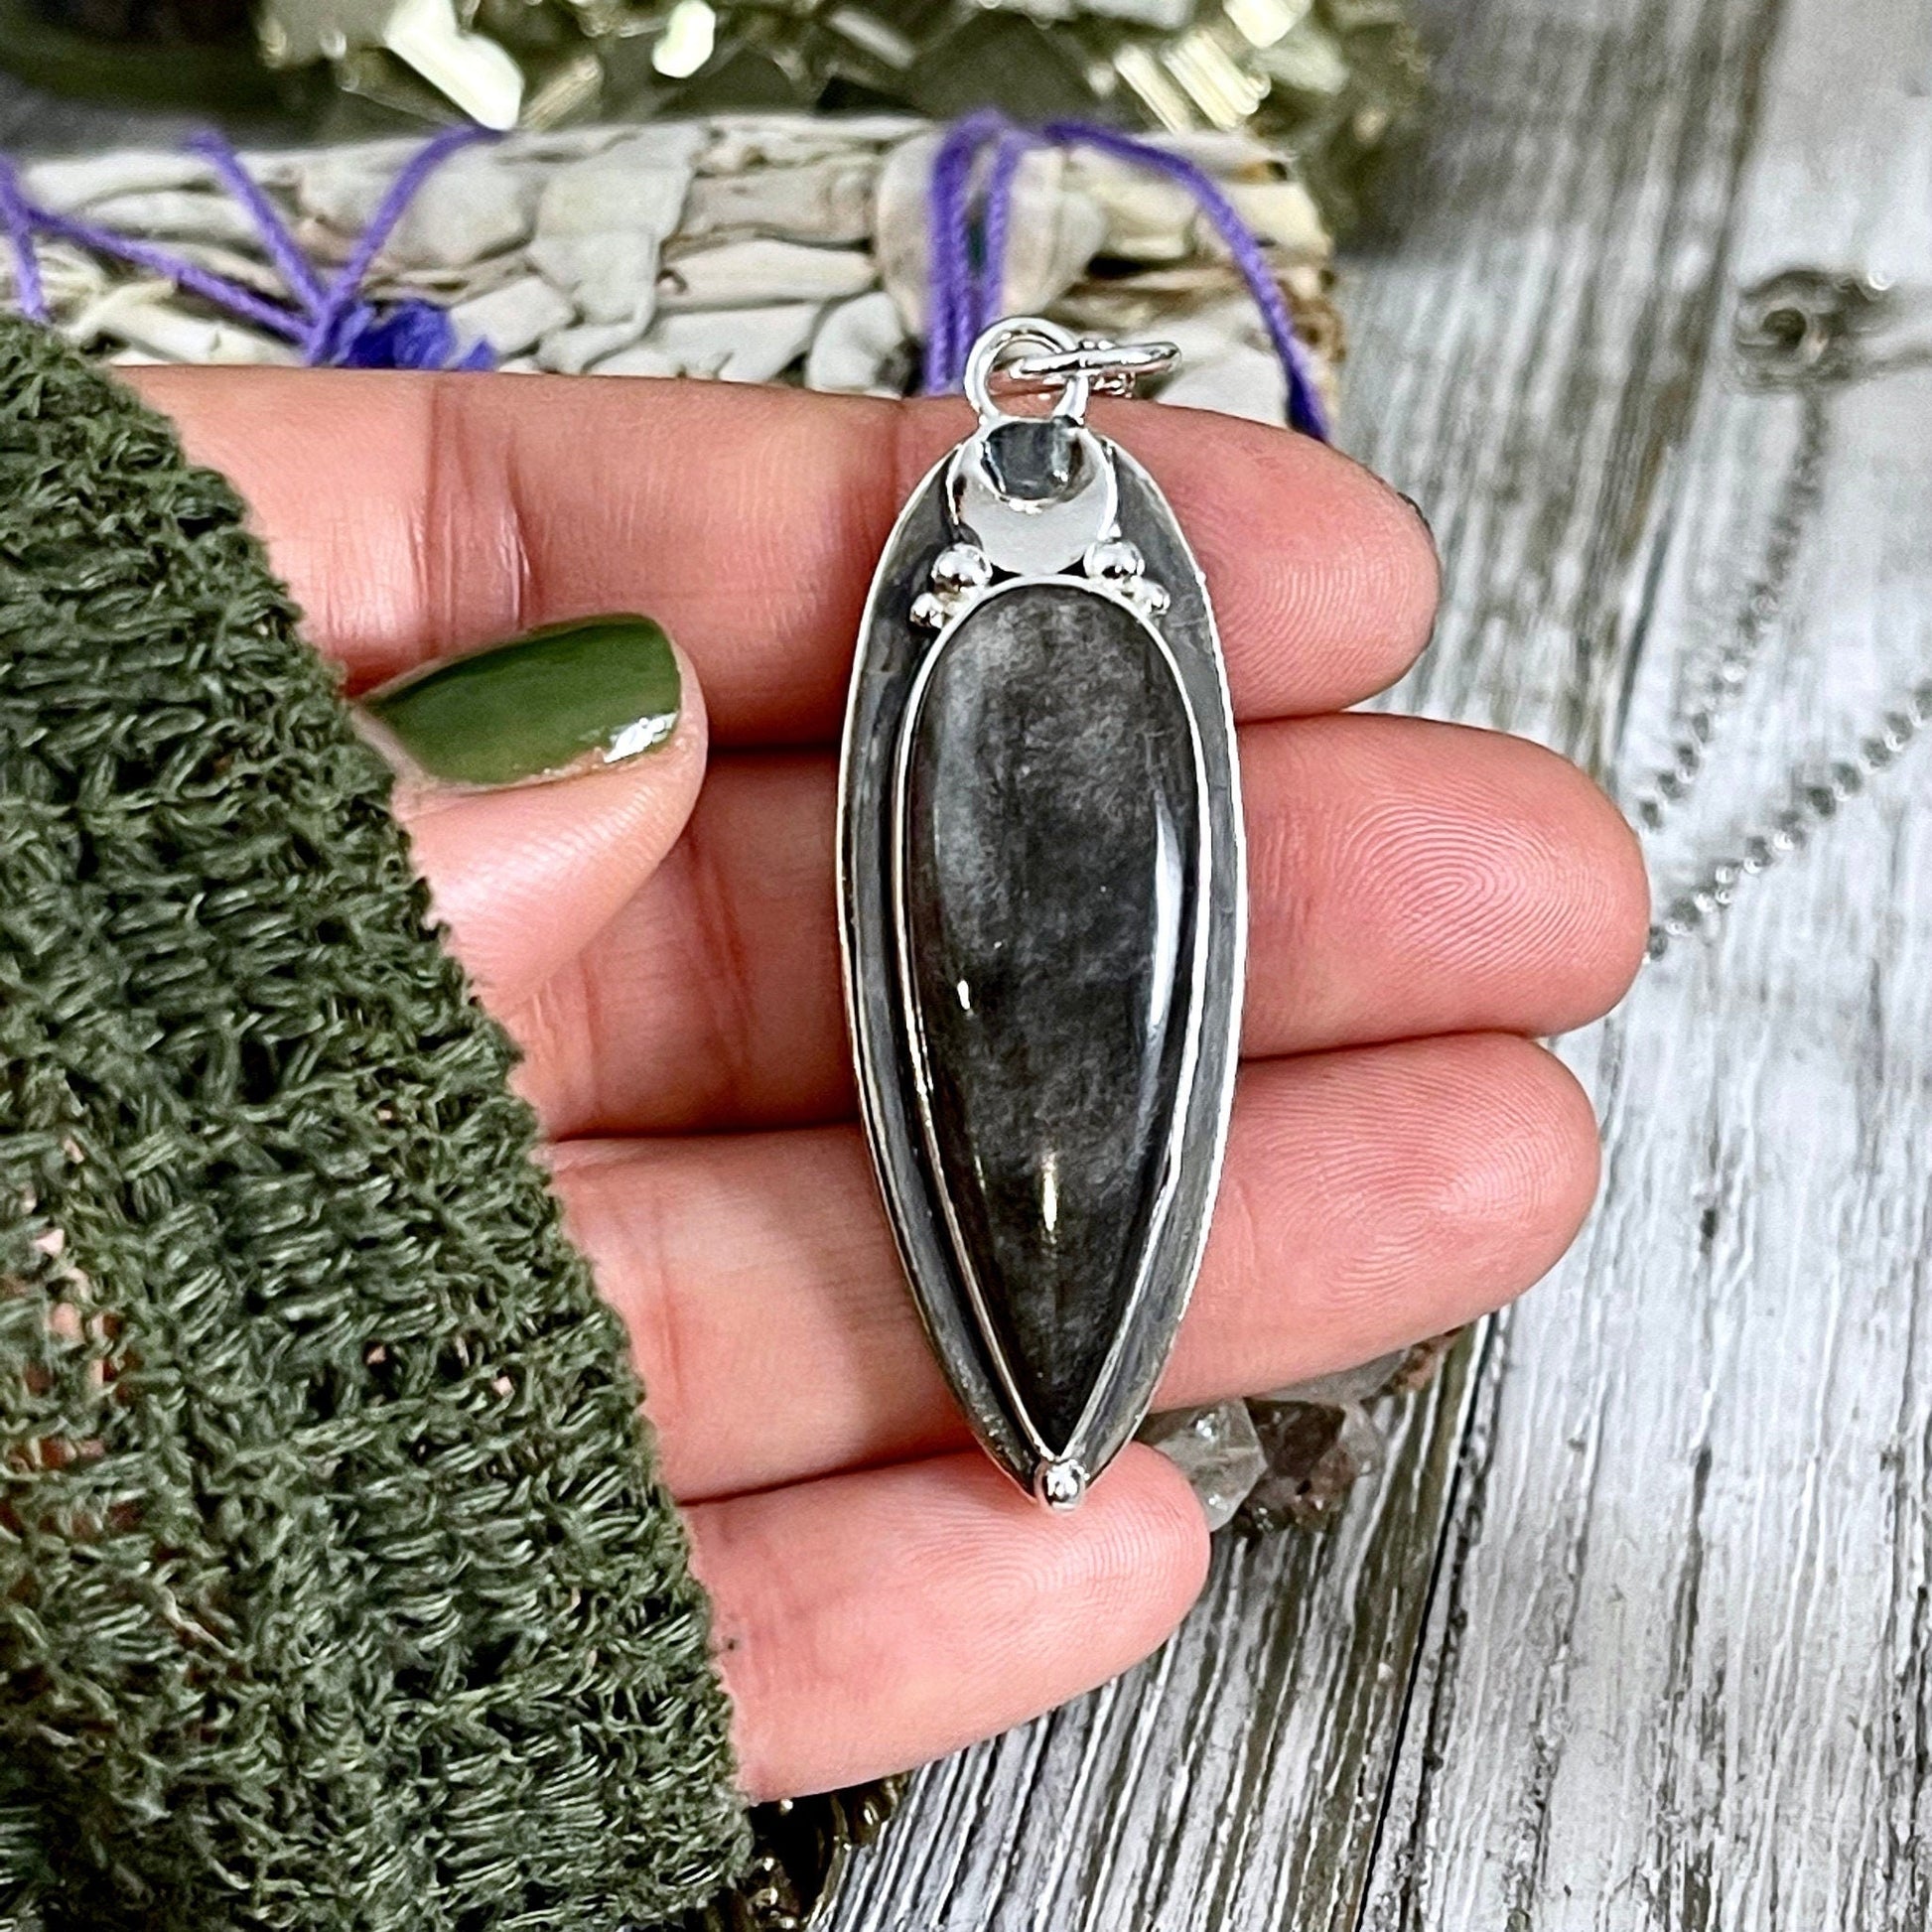 Big Gothic Necklace, Big Silver Necklace, Big Stone Necklace, Bohemian Jewelry, Crystal Necklace, Crystal Necklaces, Crystal Pendant, Etsy Id 1078432657, Foxlark- Necklaces, Gothic Jewelry, Jewelry, Moon Necklace, Necklaces, Wholesale